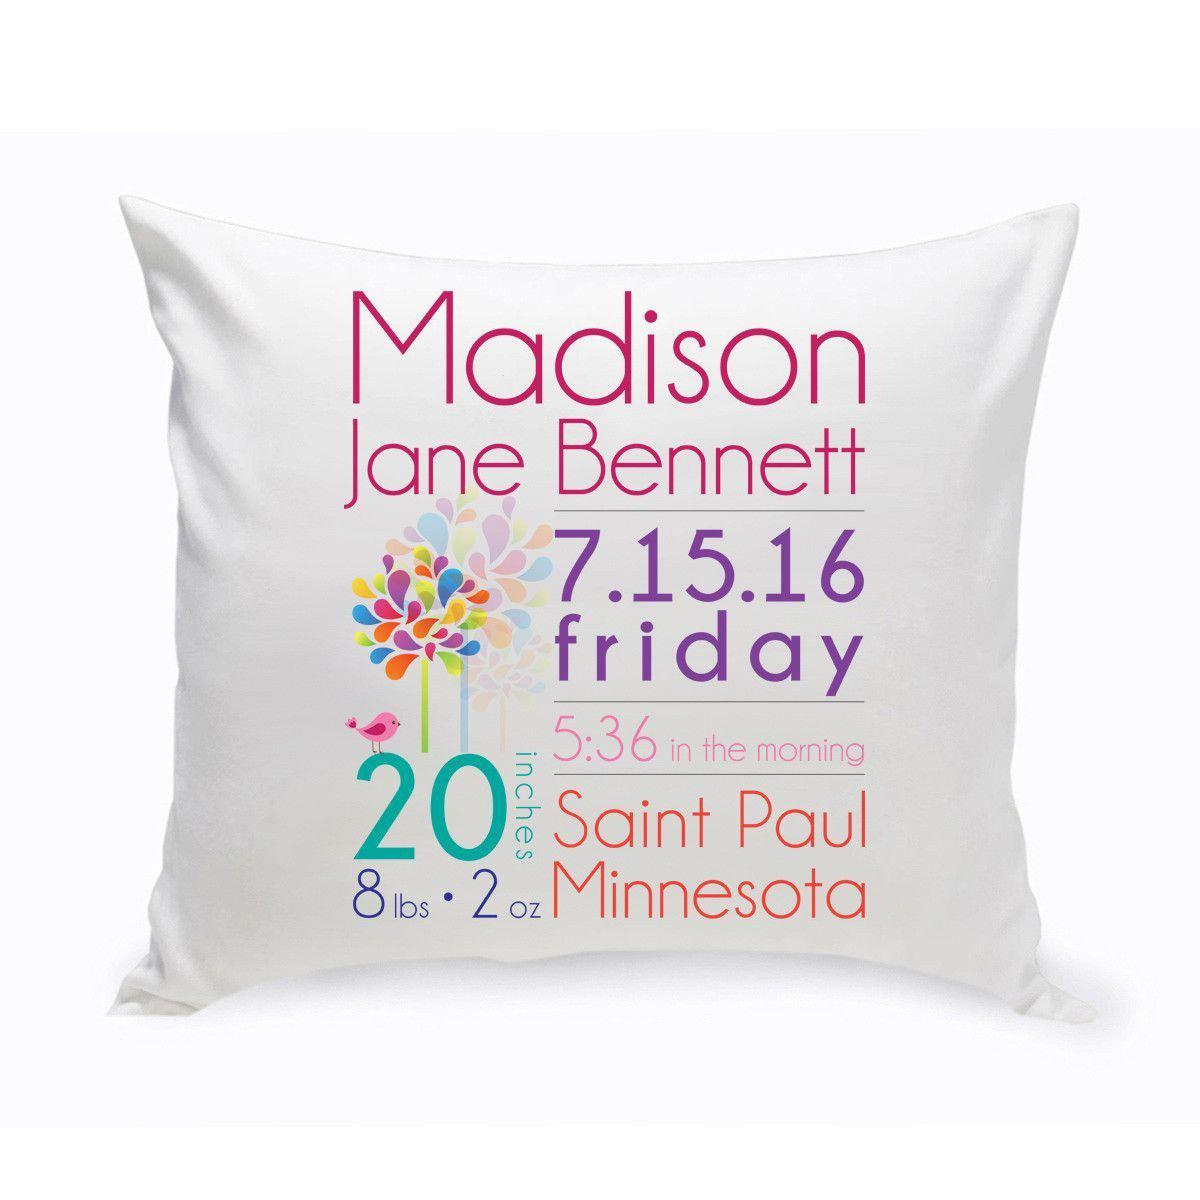 Personalized Baby Girl Announcement Throw Pillow